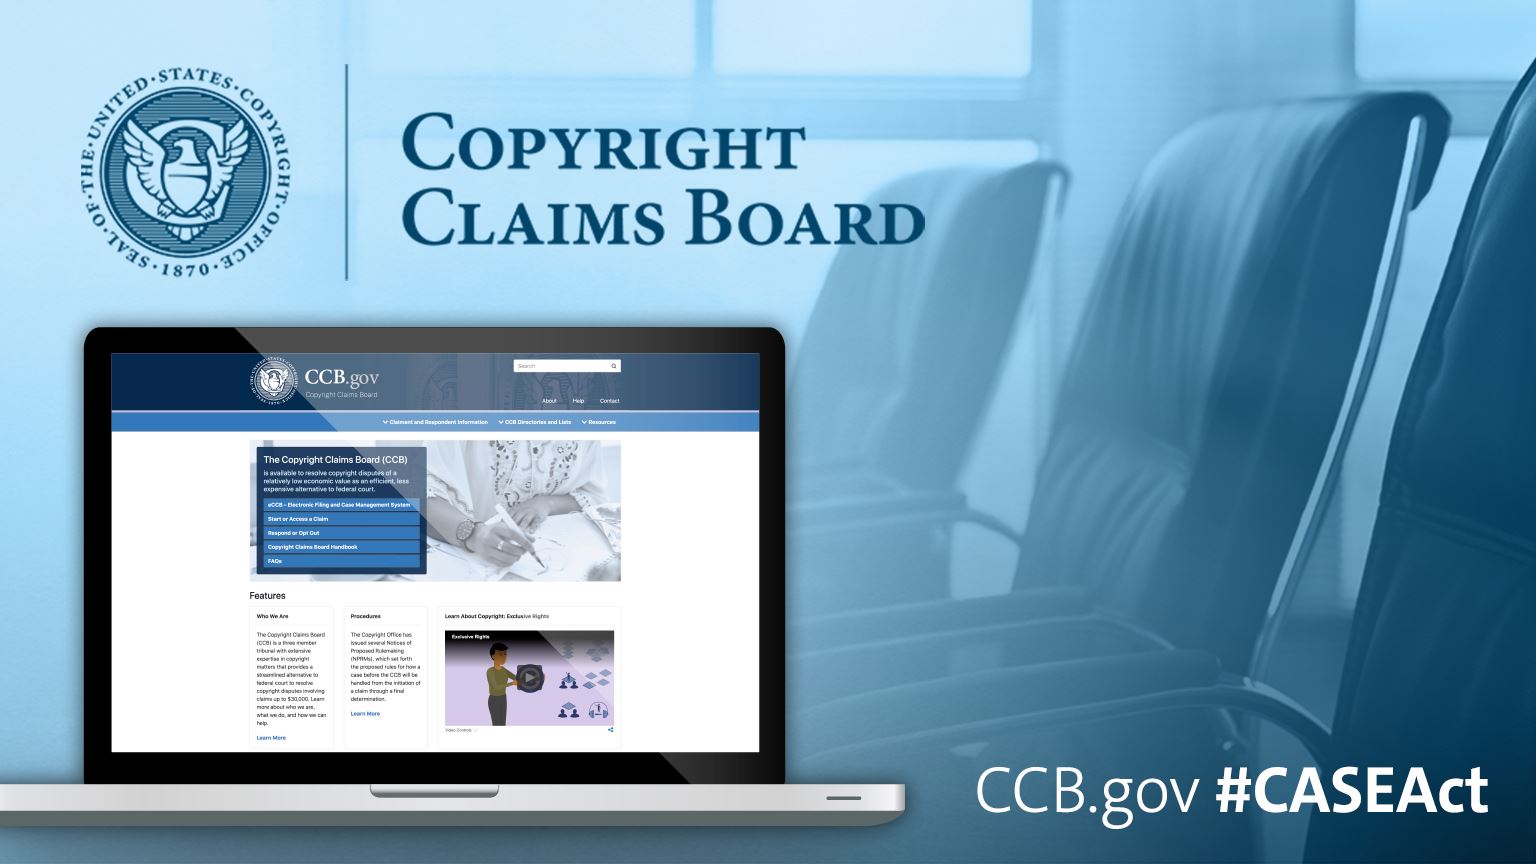 Copyright Office Launches New Copyright Claims Board Website